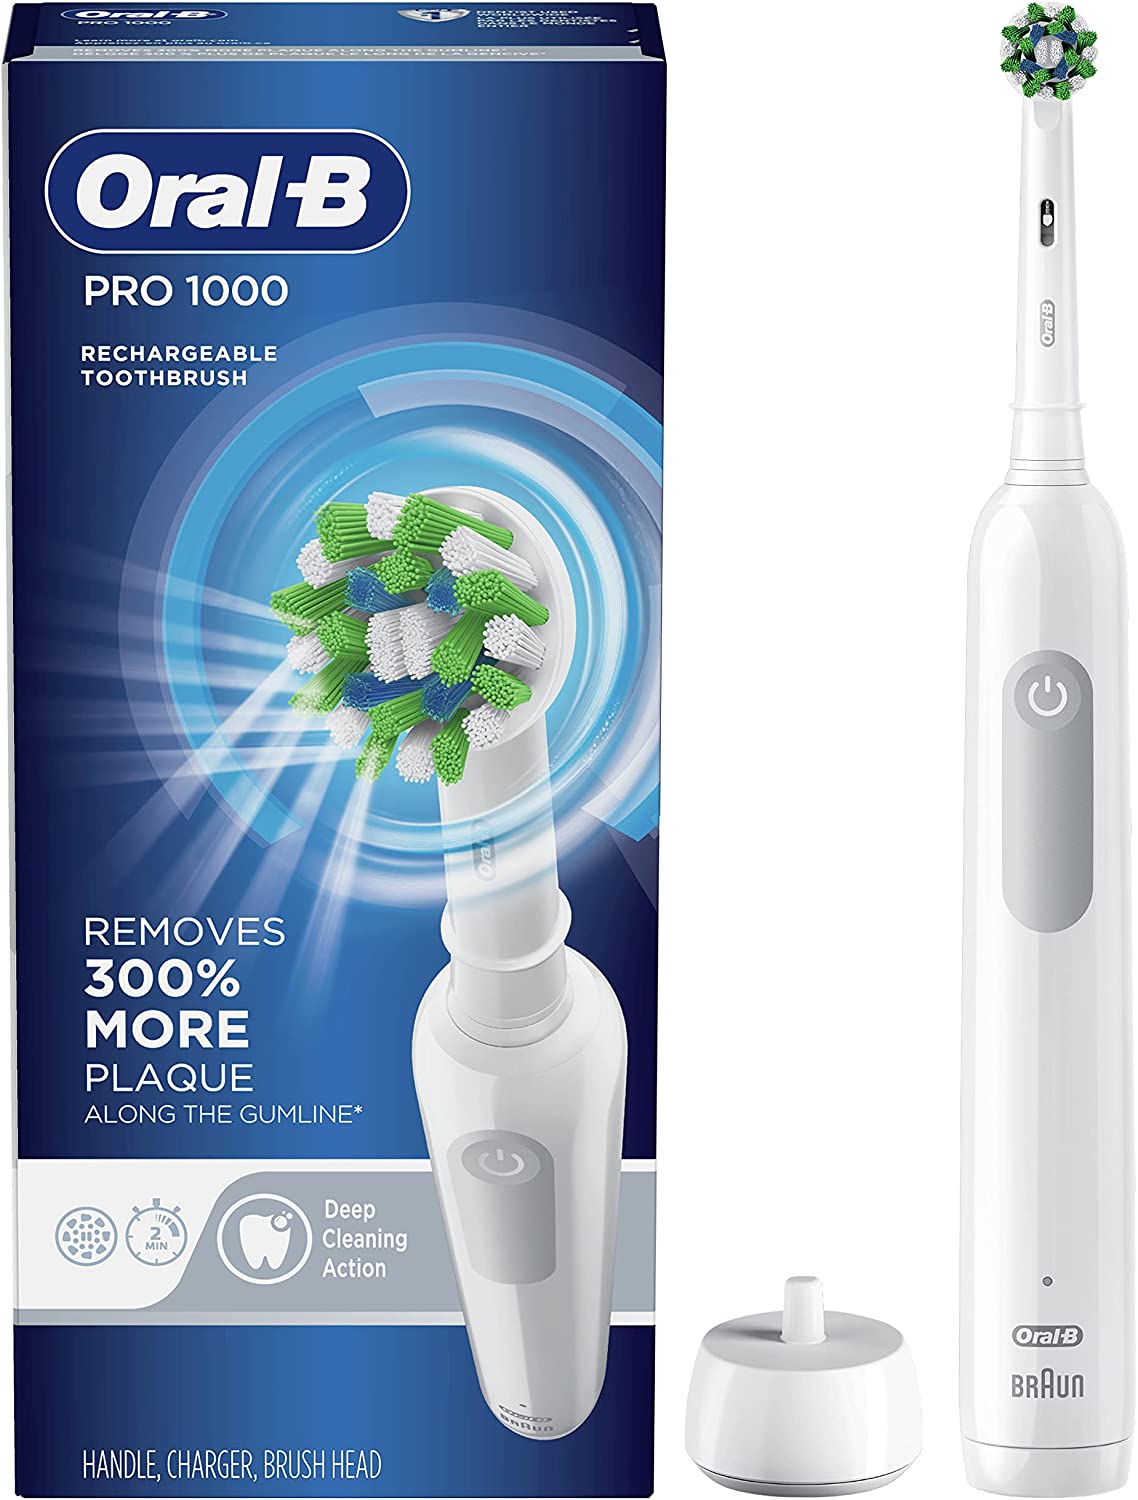 Pro 1000 Battery Powered Electric Toothbrush